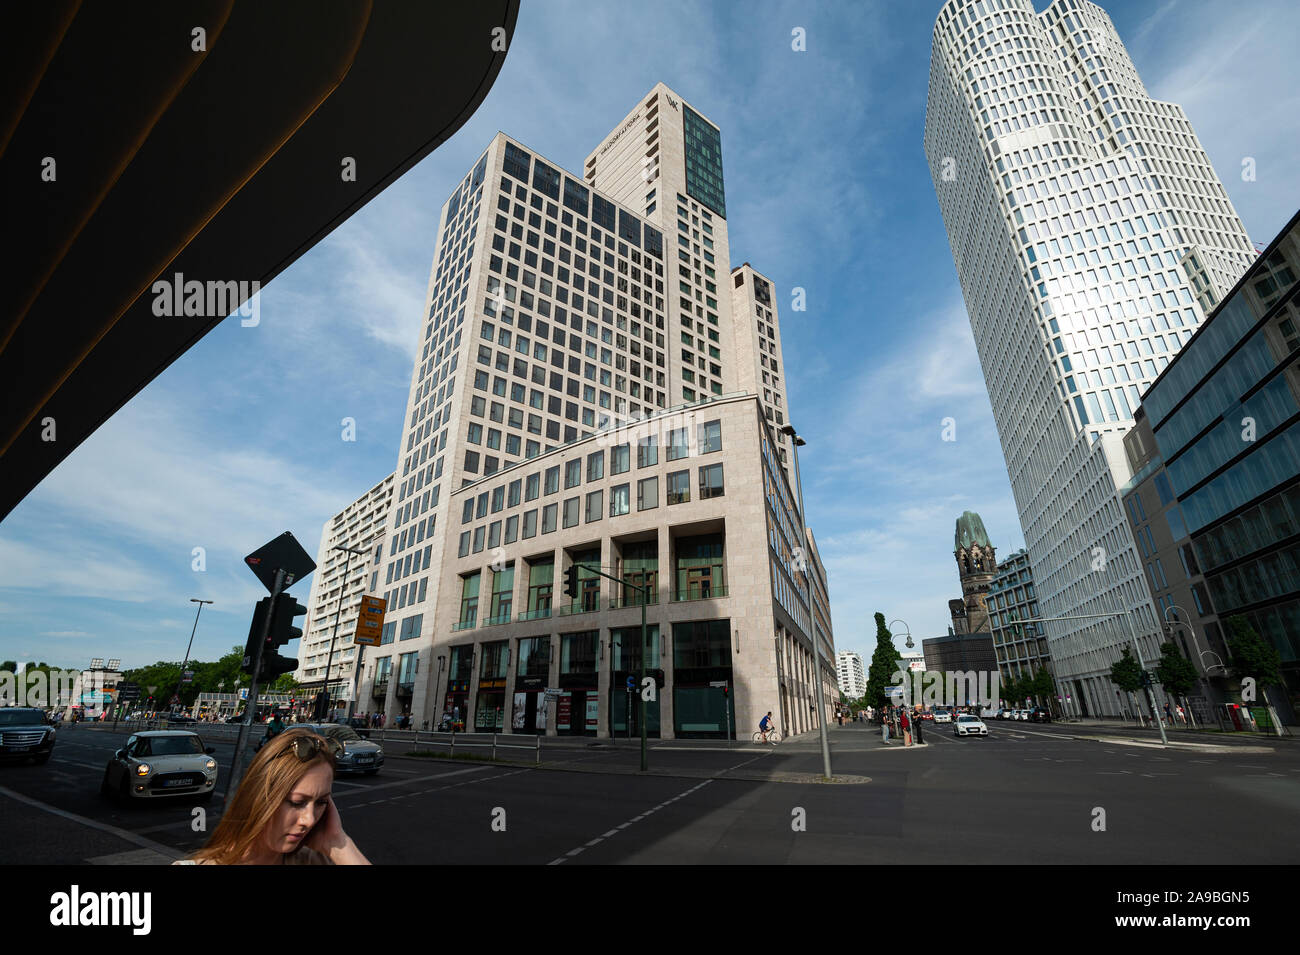 09.06.2019, Berlin, , Germany - View of the Upper West building complex and the Waldorf Astoria Hotel in Berlin-Charlottenburg. 0SL190609D005CAROEX.JP Stock Photo